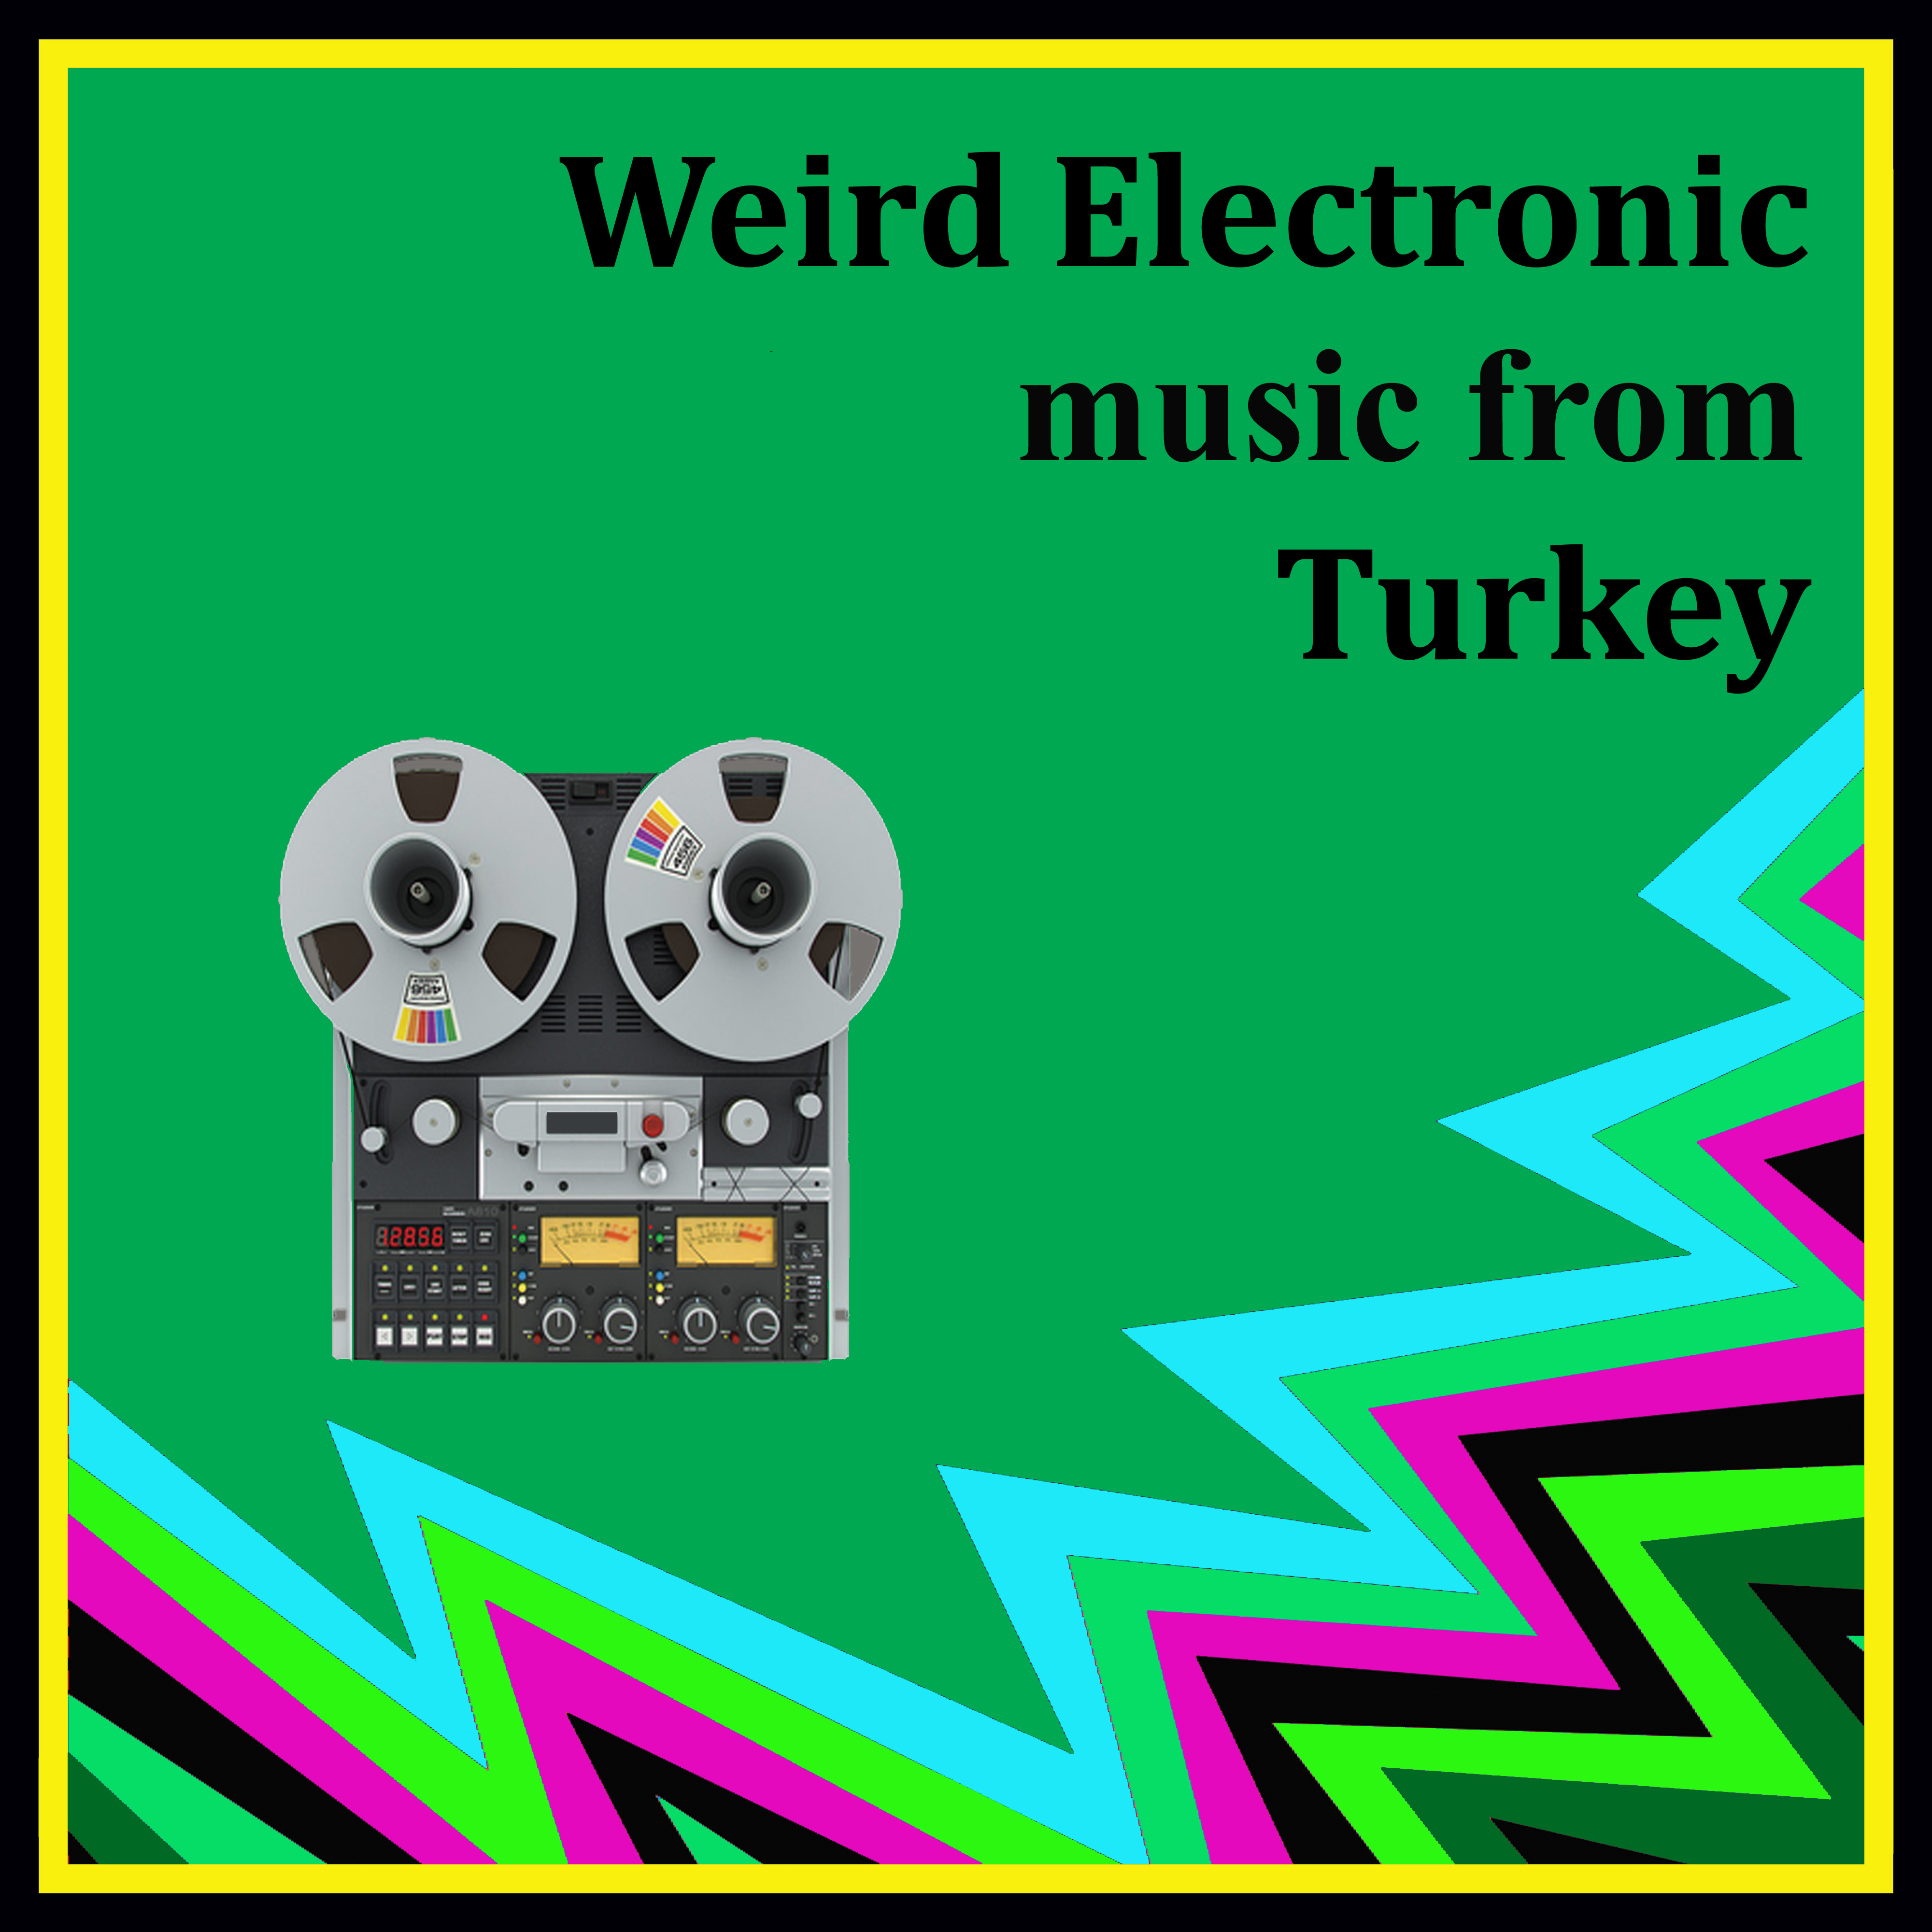 Weird Electronic Music from Turkey